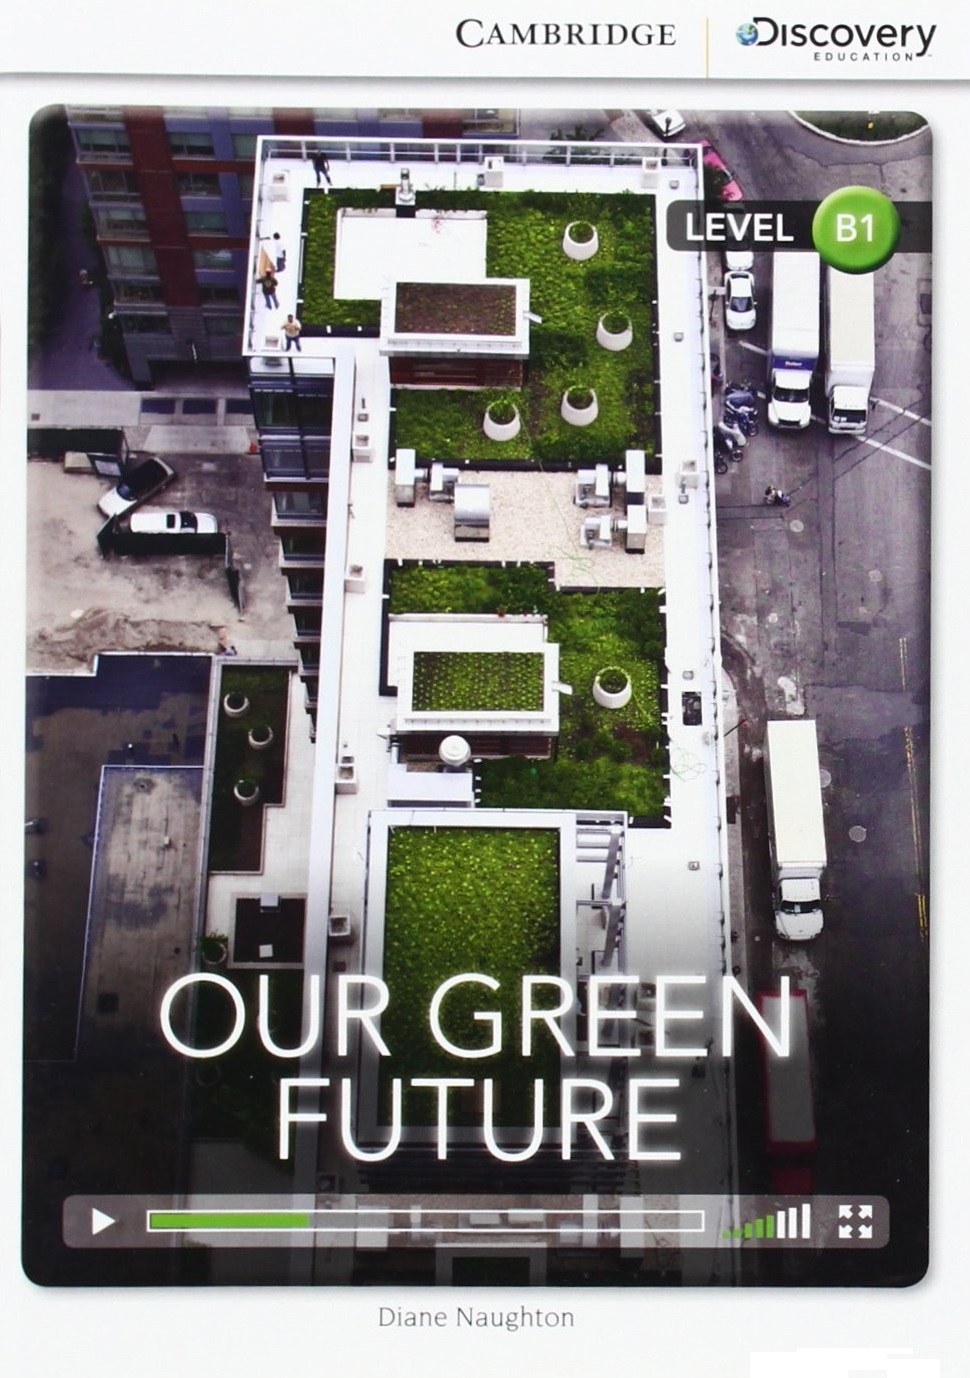 Our Green Future